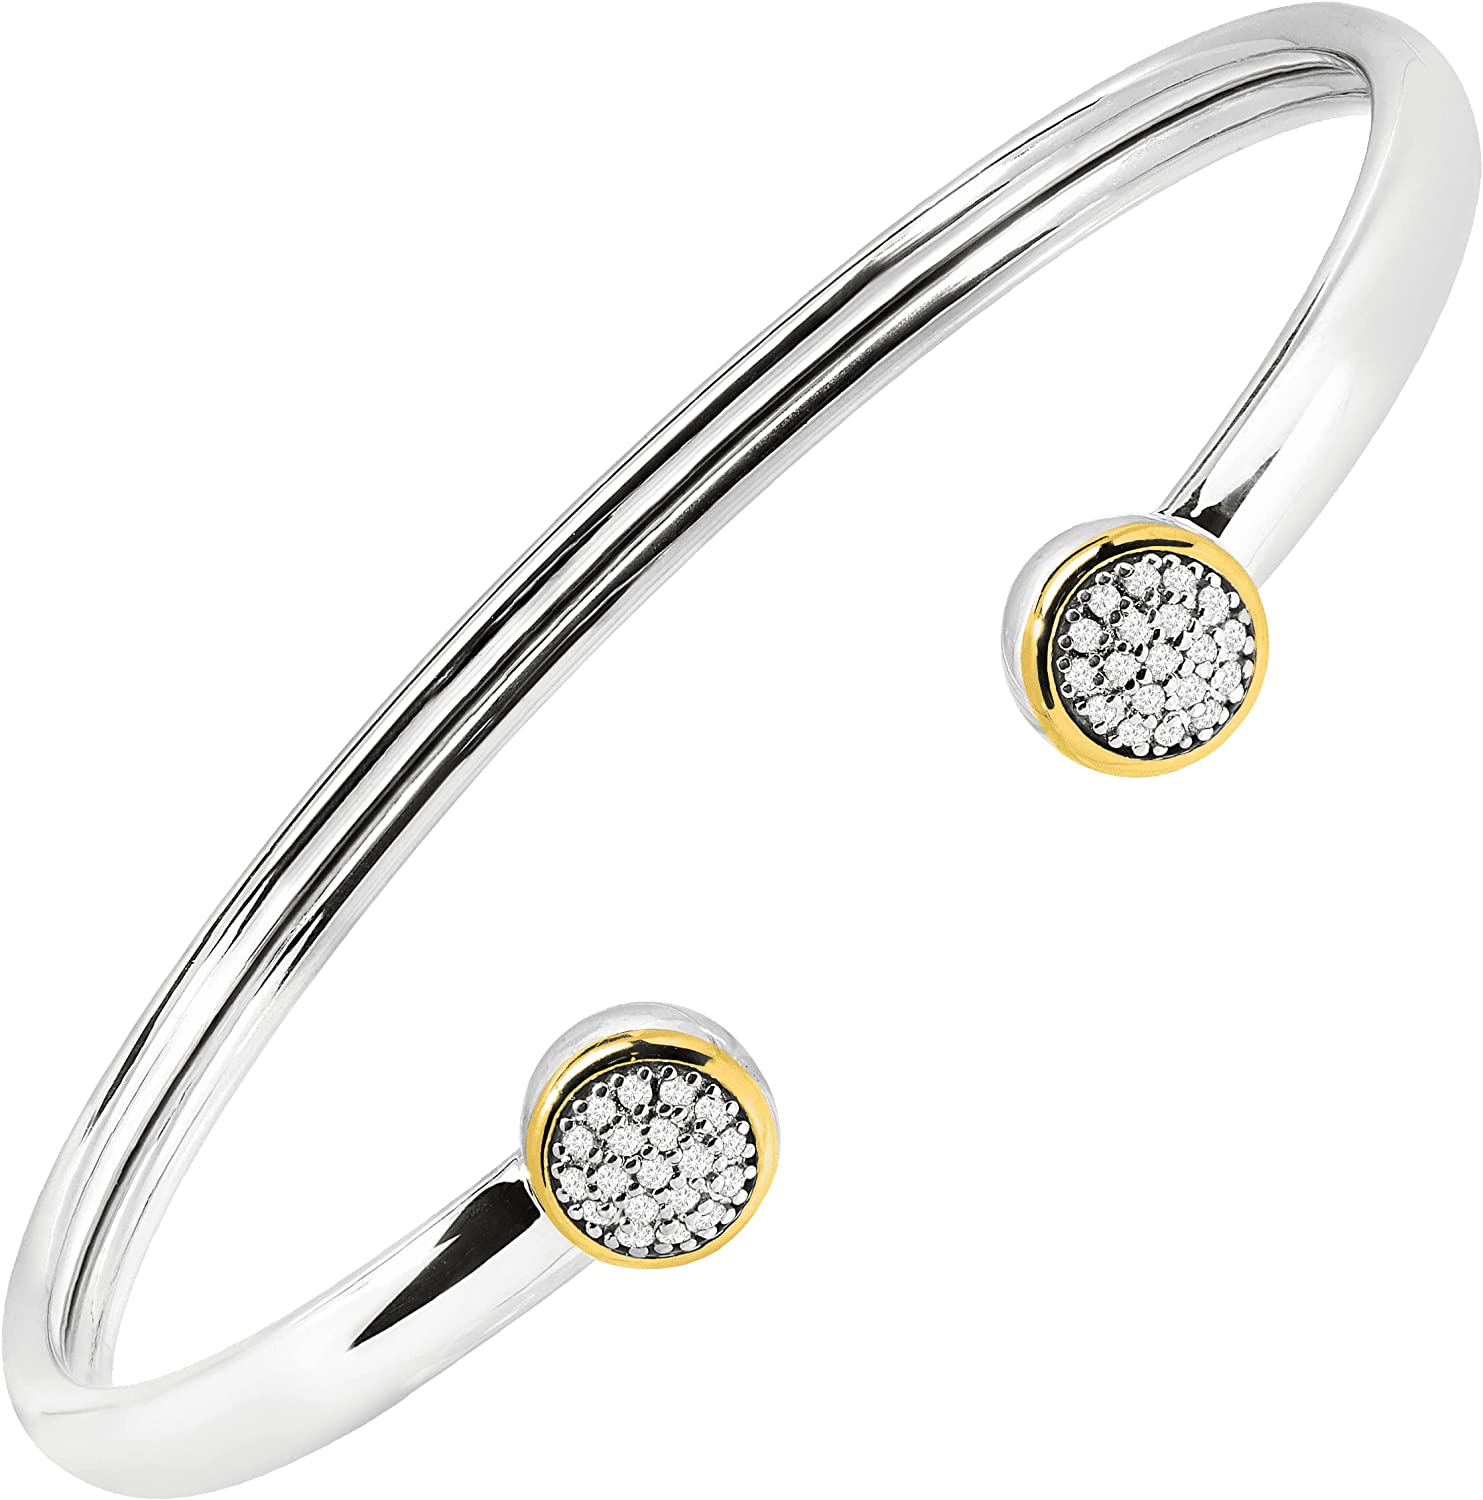 Welry 1/5 cttw Diamond Circle Cuff Bracelet in Sterling Silver & 14K Yellow Gold, 7"